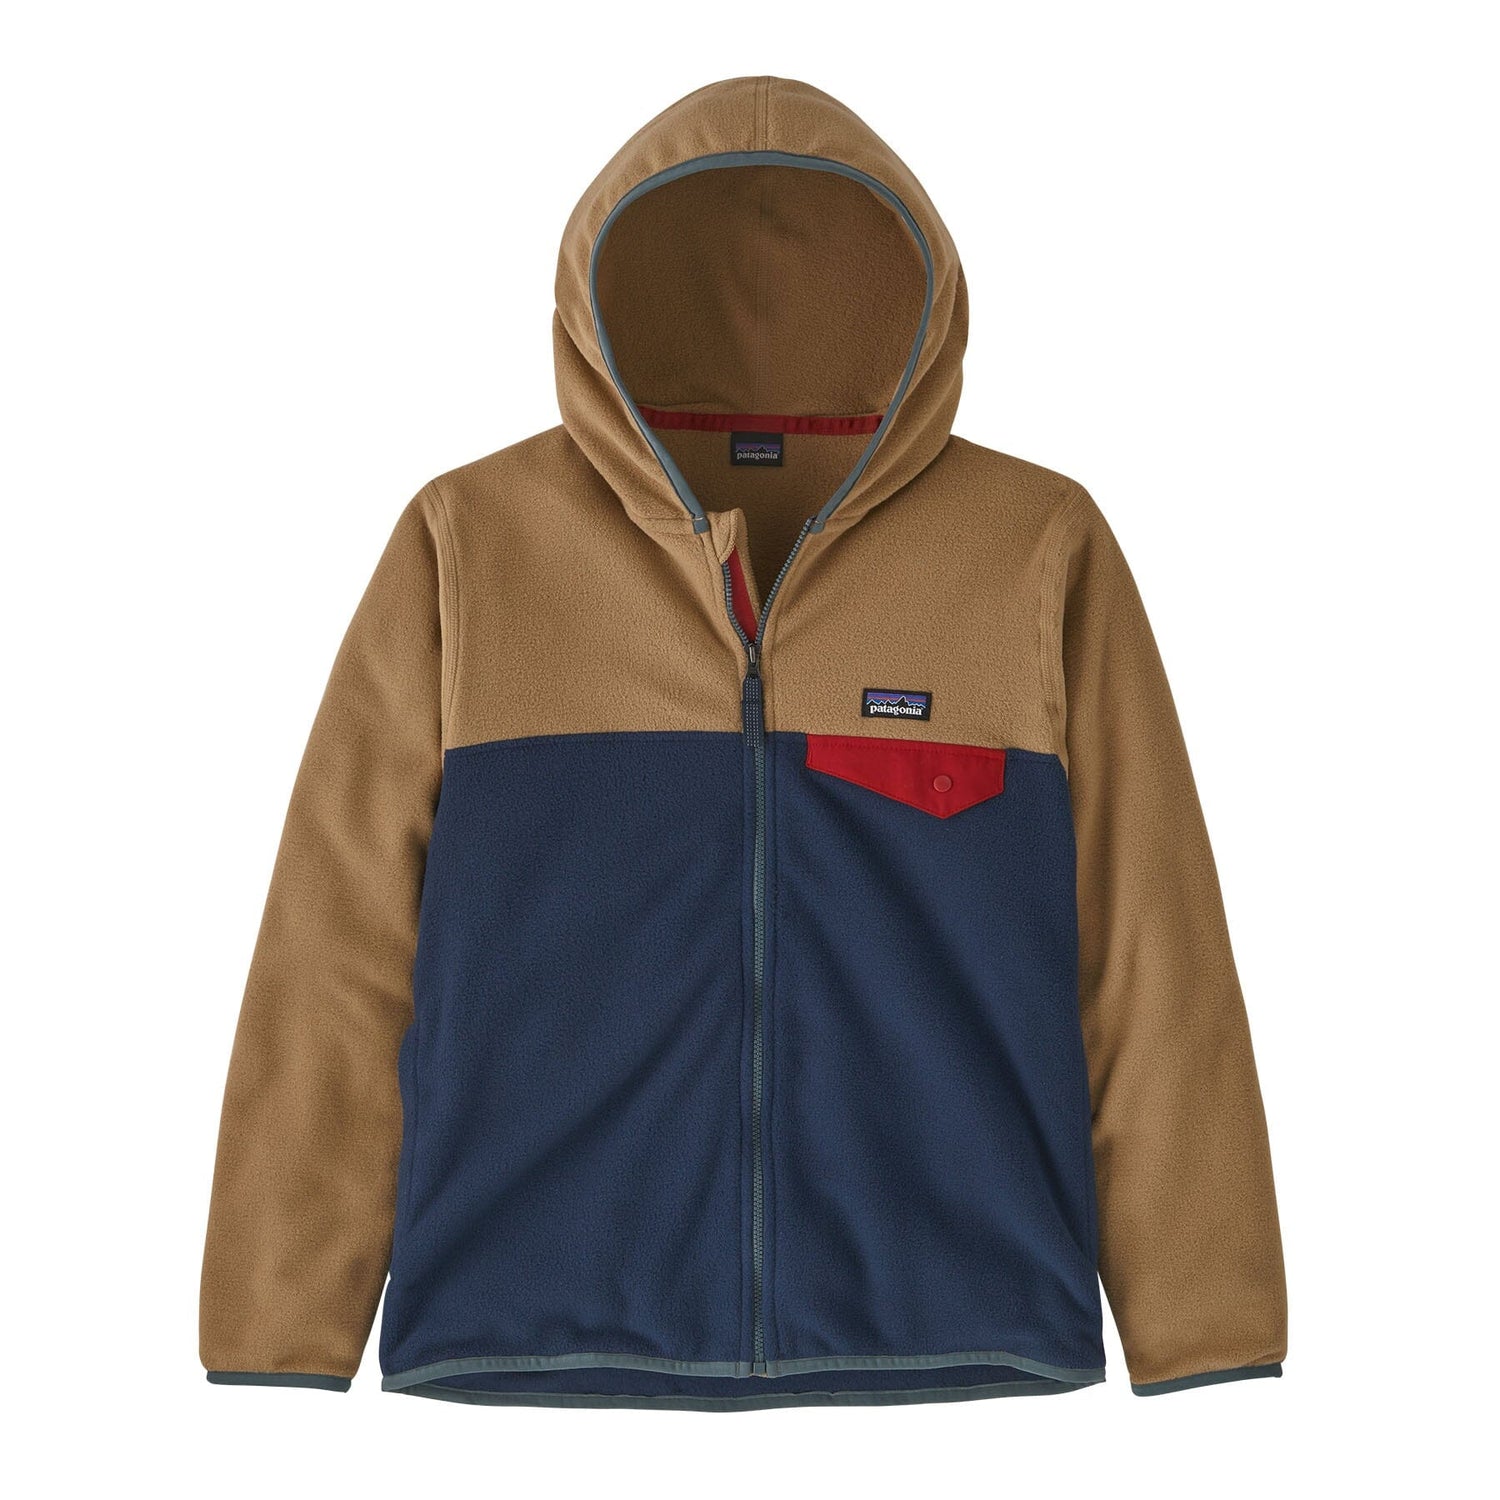 Patagonia Kids Micro D Snap-T Jacket - 100% recycled polyester New Navy w/Grayling Brown Jacket